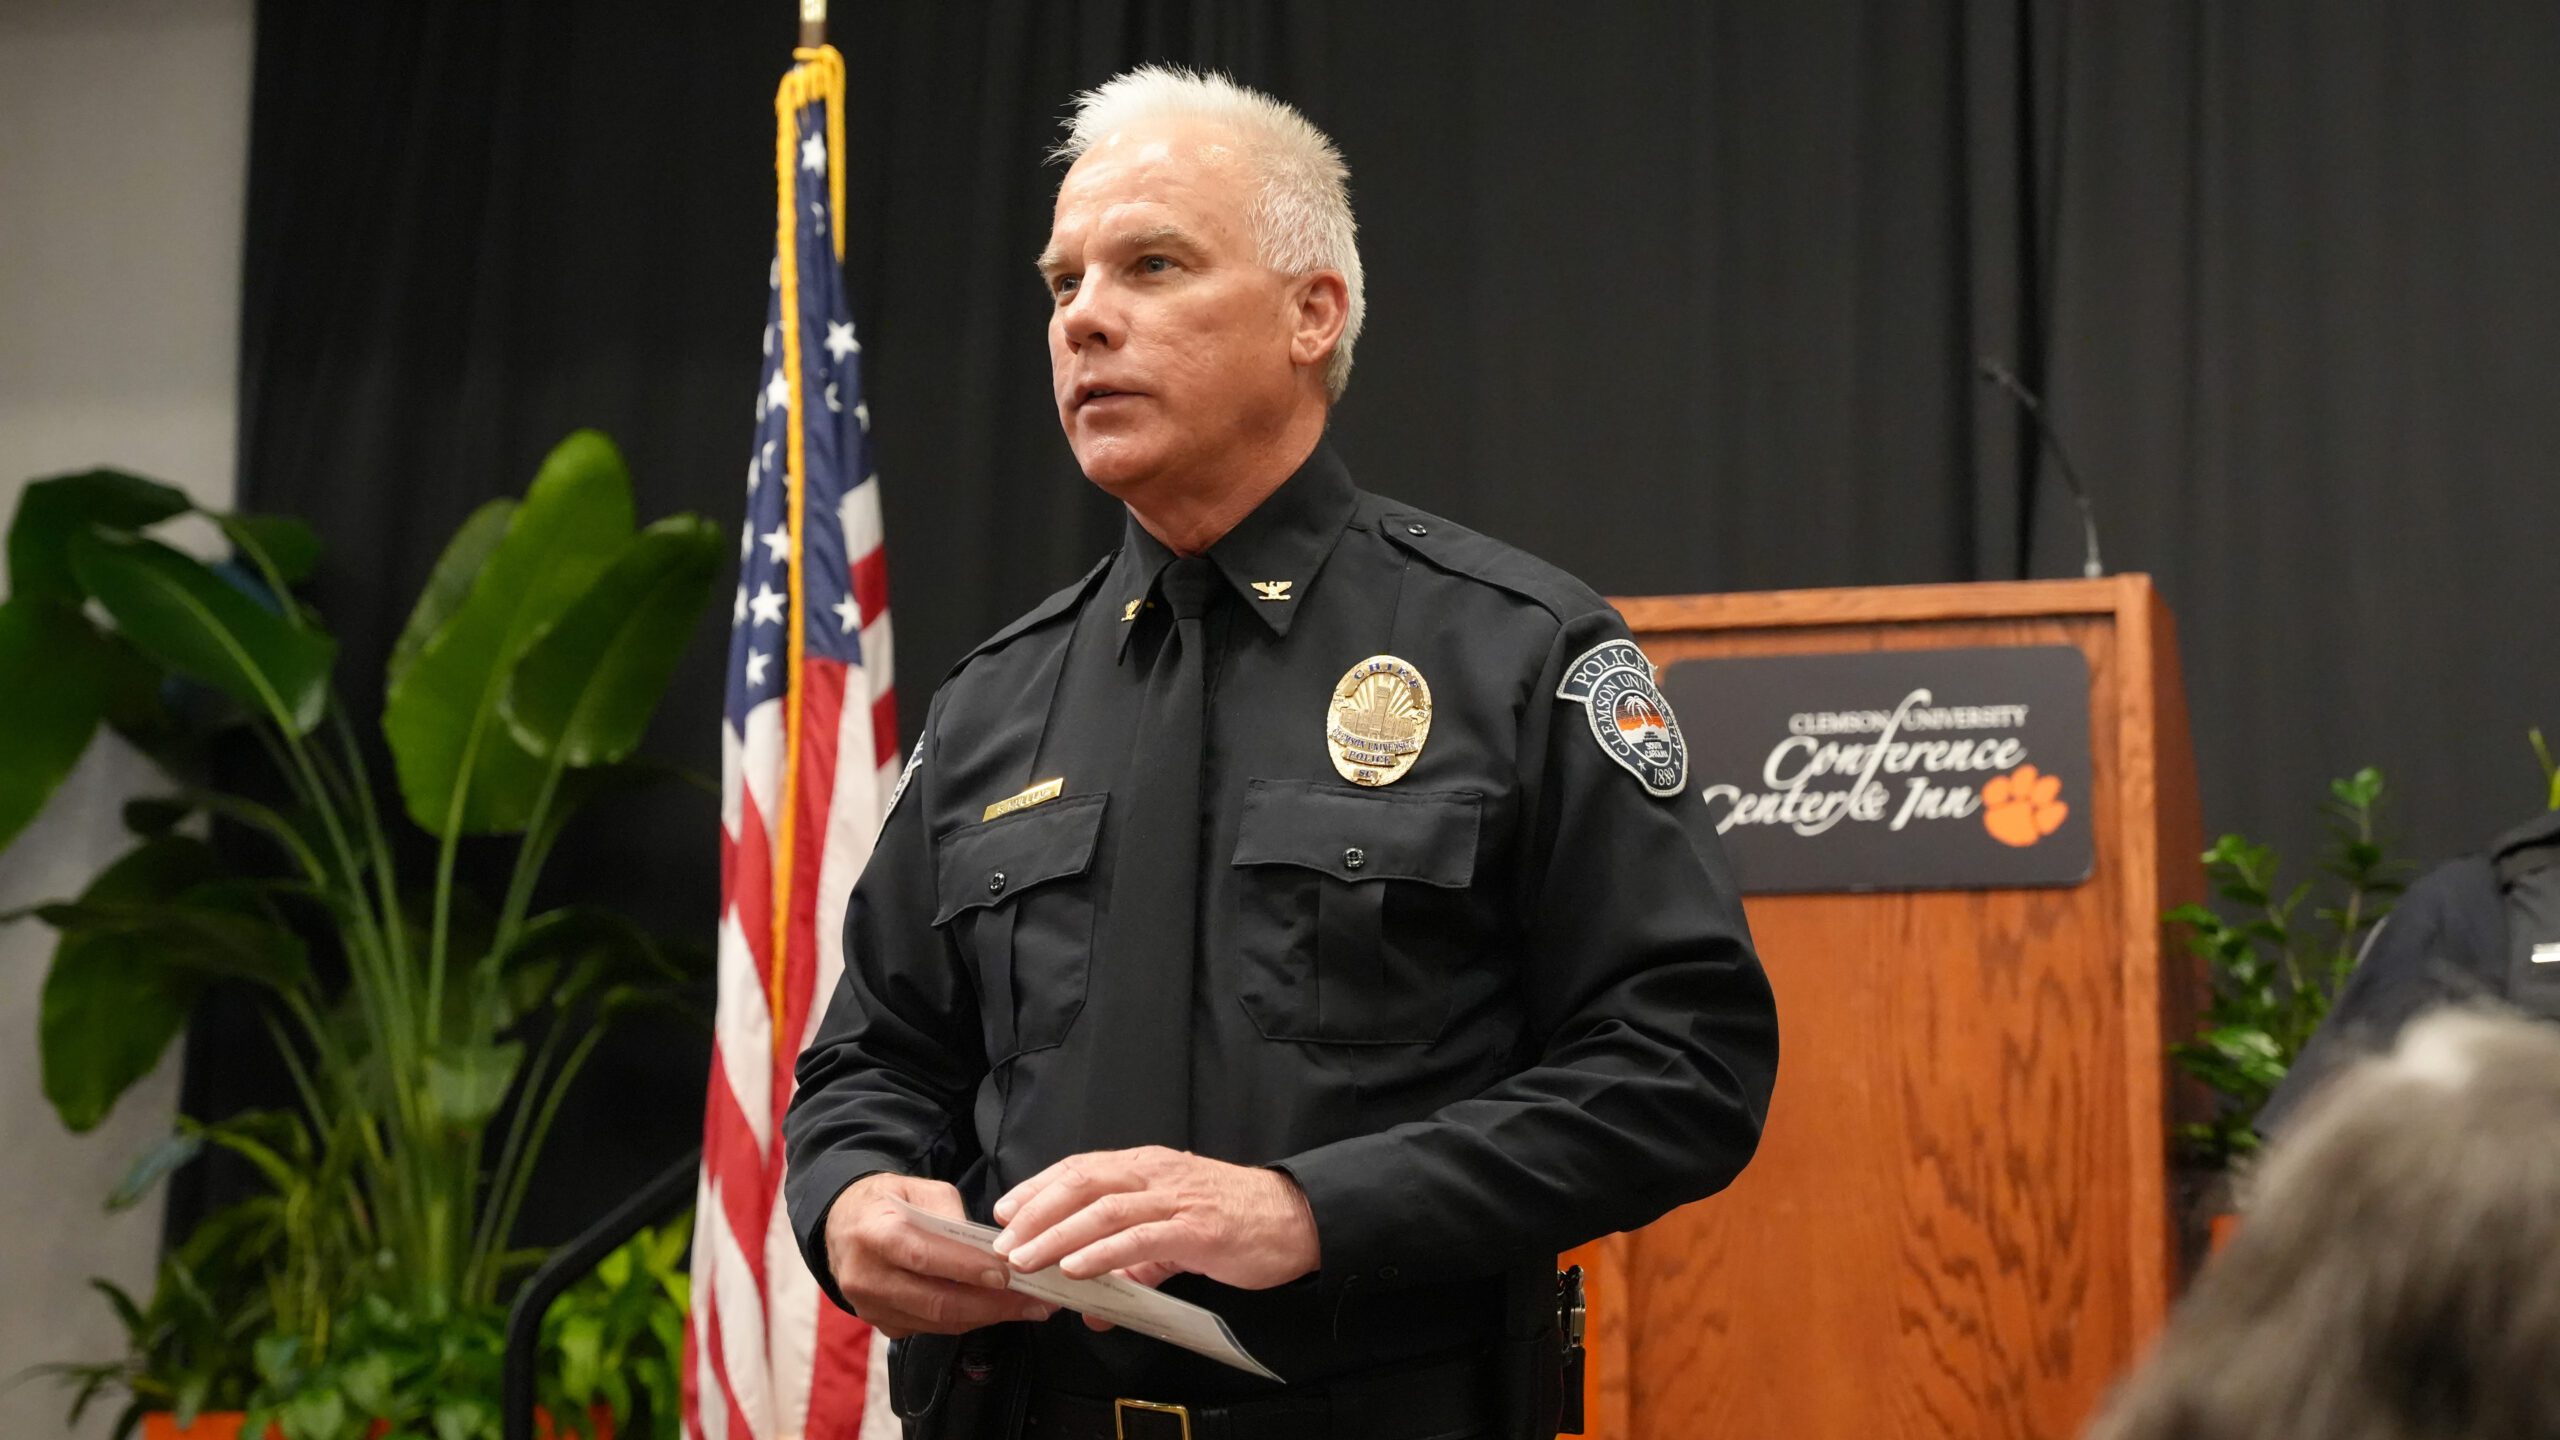 CUPD Chief Greg Mullen speaks to the audience at the CUPD awards ceremony in the Madren Center Ballroom.